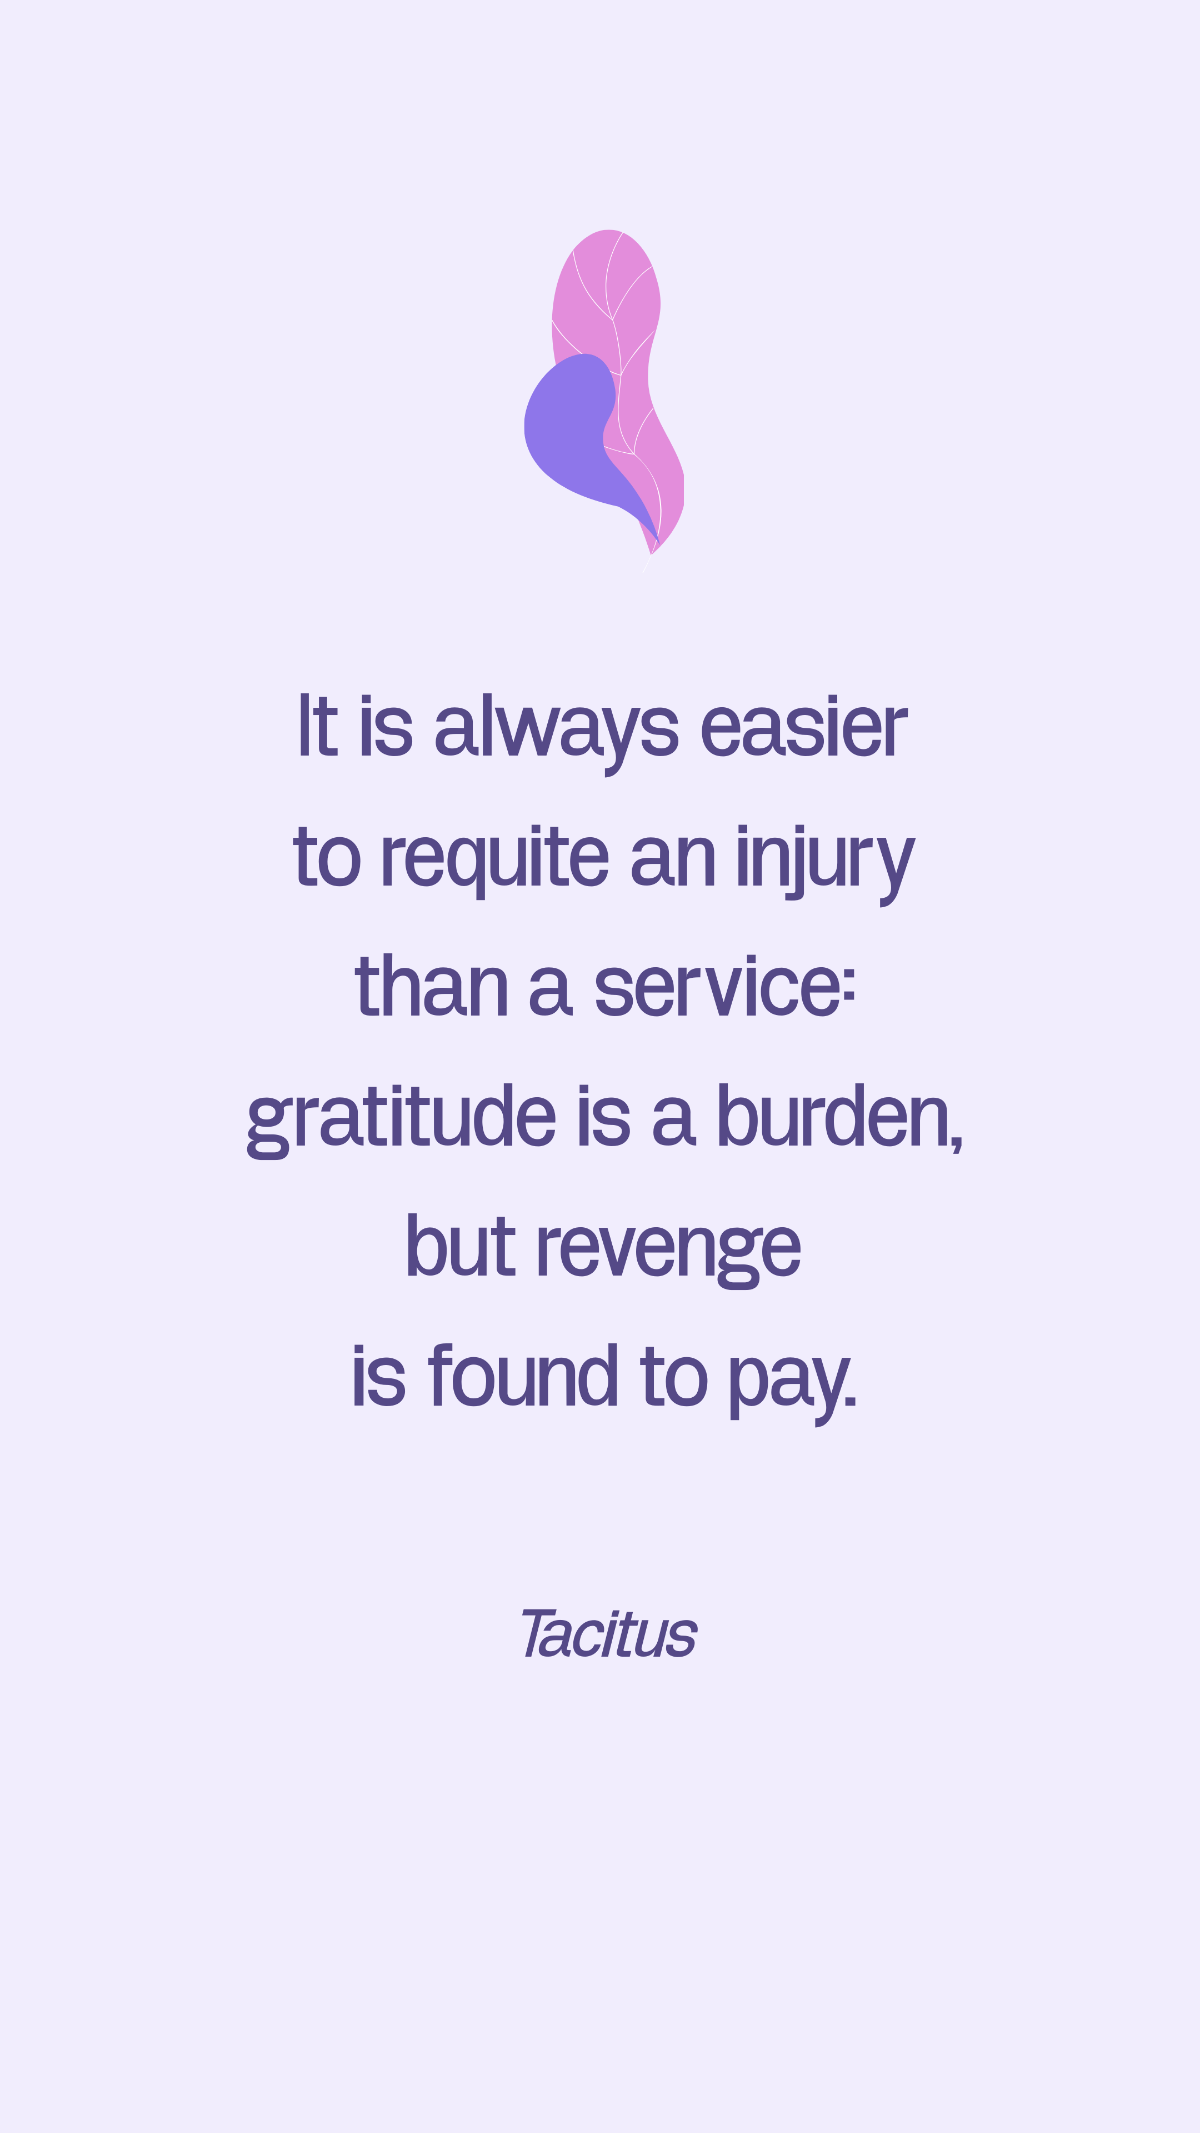 Free Tacitus - It is always easier to requite an injury than a service: gratitude is a burden, but revenge is found to pay. Template